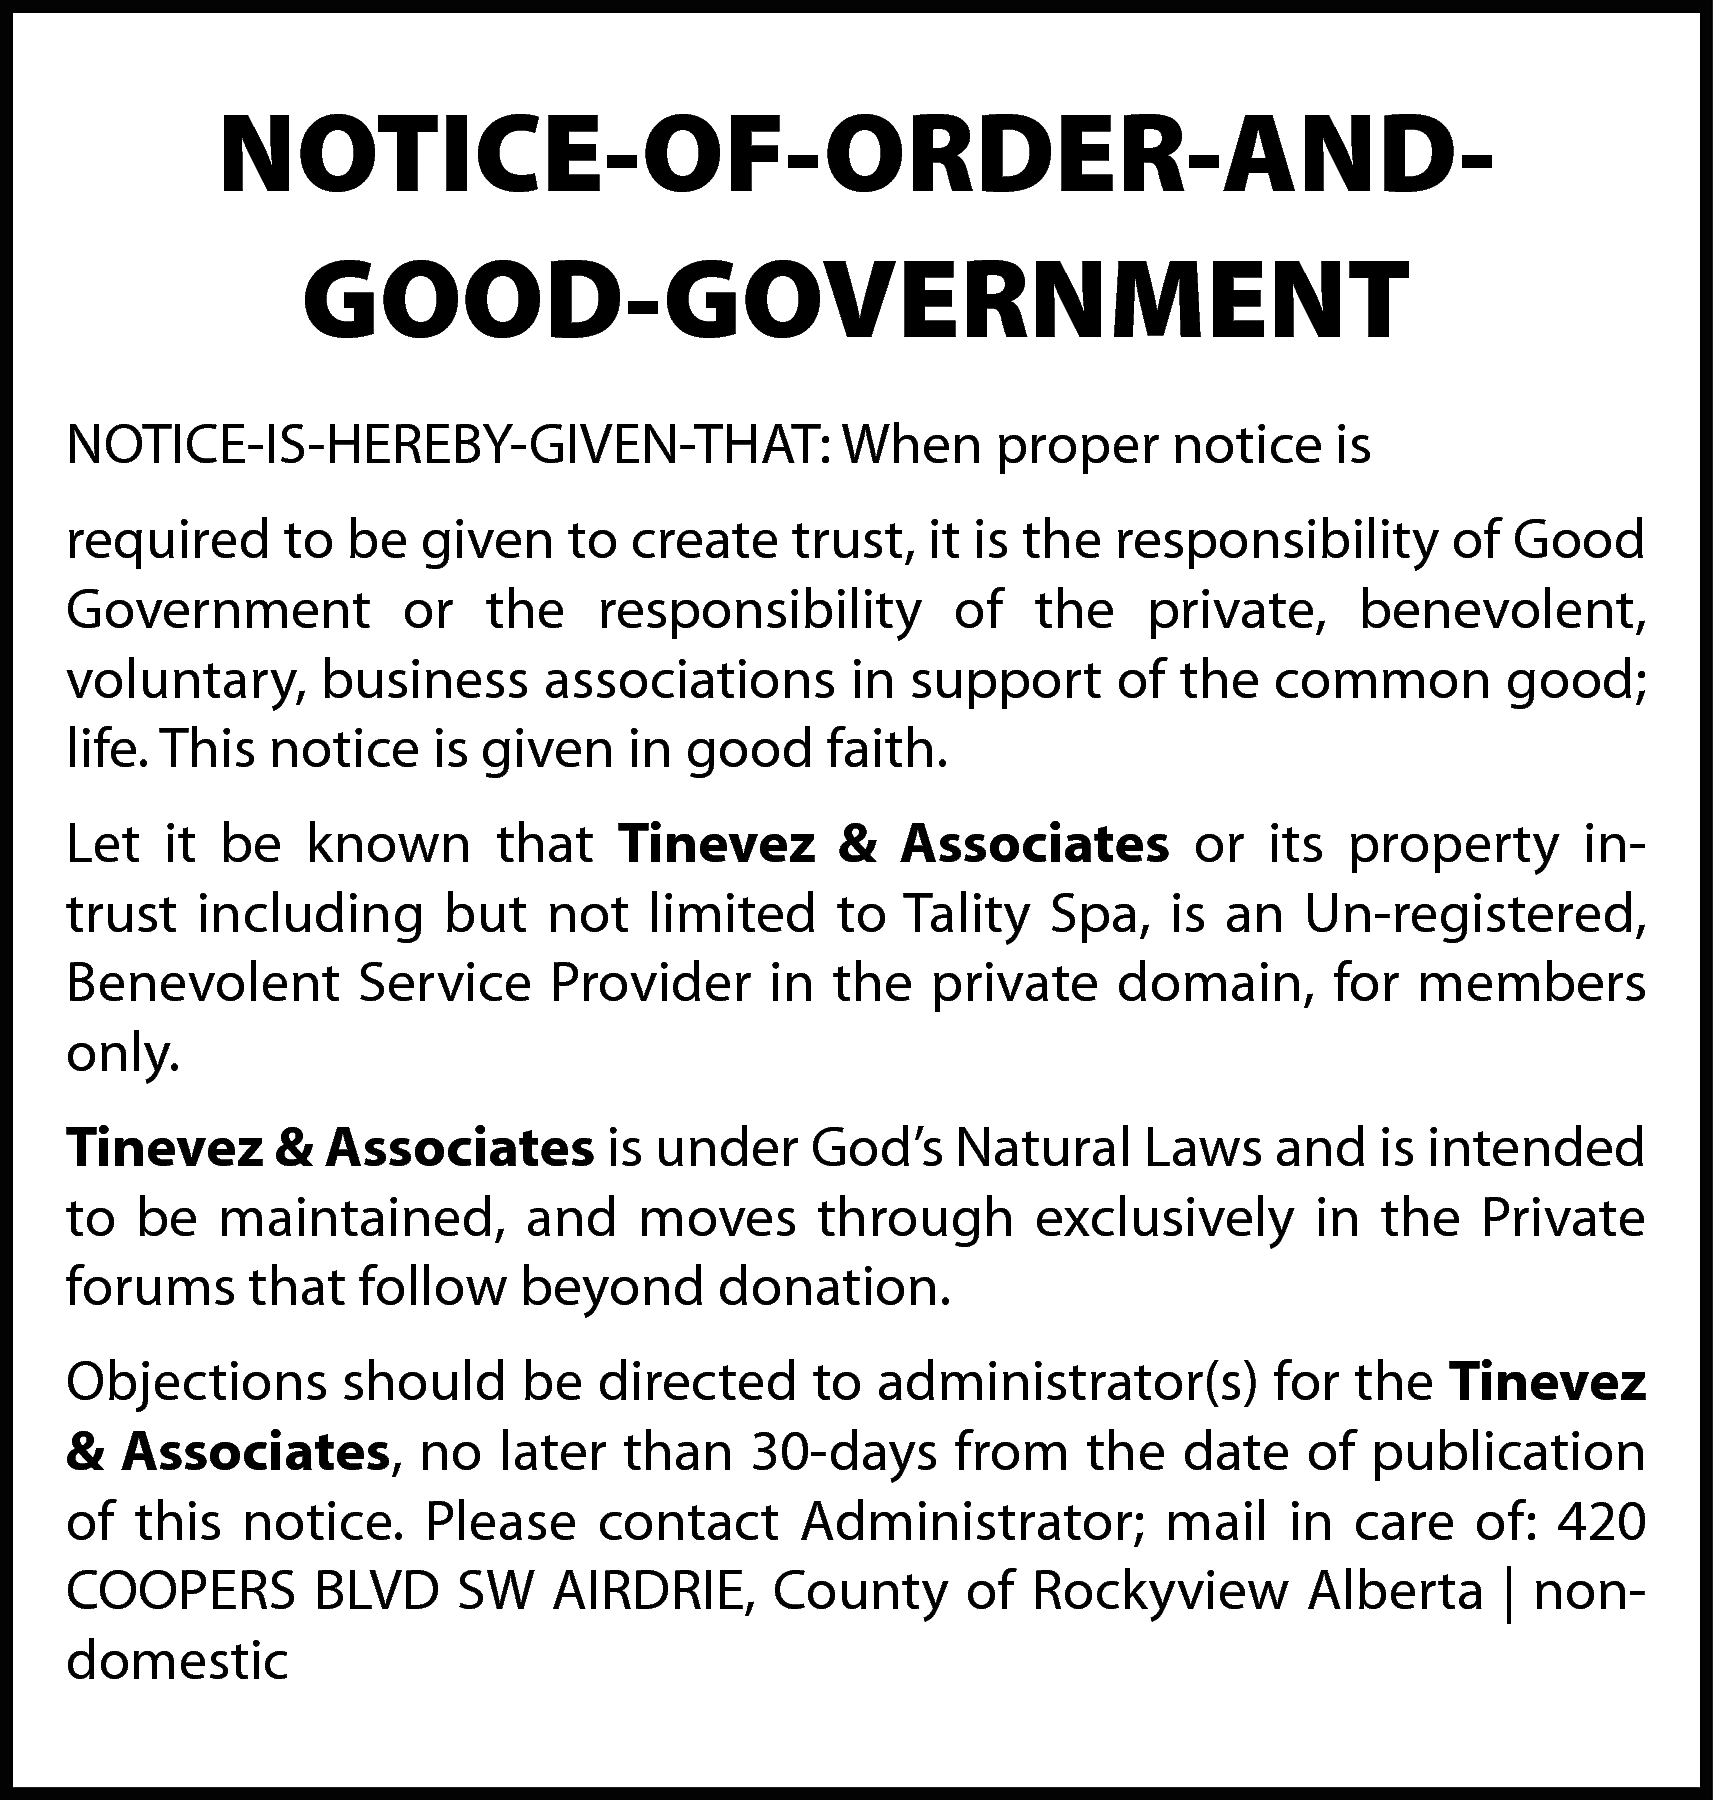 NOTICE-OF-ORDER-ANDGOOD-GOVERNMENT <br>NOTICE-IS-HEREBY-GIVEN-THAT: When proper notice  NOTICE-OF-ORDER-ANDGOOD-GOVERNMENT  NOTICE-IS-HEREBY-GIVEN-THAT: When proper notice is  required to be given to create trust, it is the responsibility of Good  Government or the responsibility of the private, benevolent,  voluntary, business associations in support of the common good;  life. This notice is given in good faith.  Let it be known that Tinevez & Associates or its property intrust including but not limited to Tality Spa, is an Un-registered,  Benevolent Service Provider in the private domain, for members  only.  Tinevez & Associates is under God’s Natural Laws and is intended  to be maintained, and moves through exclusively in the Private  forums that follow beyond donation.  Objections should be directed to administrator(s) for the Tinevez  & Associates, no later than 30-days from the date of publication  of this notice. Please contact Administrator; mail in care of: 420  COOPERS BLVD SW AIRDRIE, County of Rockyview Alberta | nondomestic    